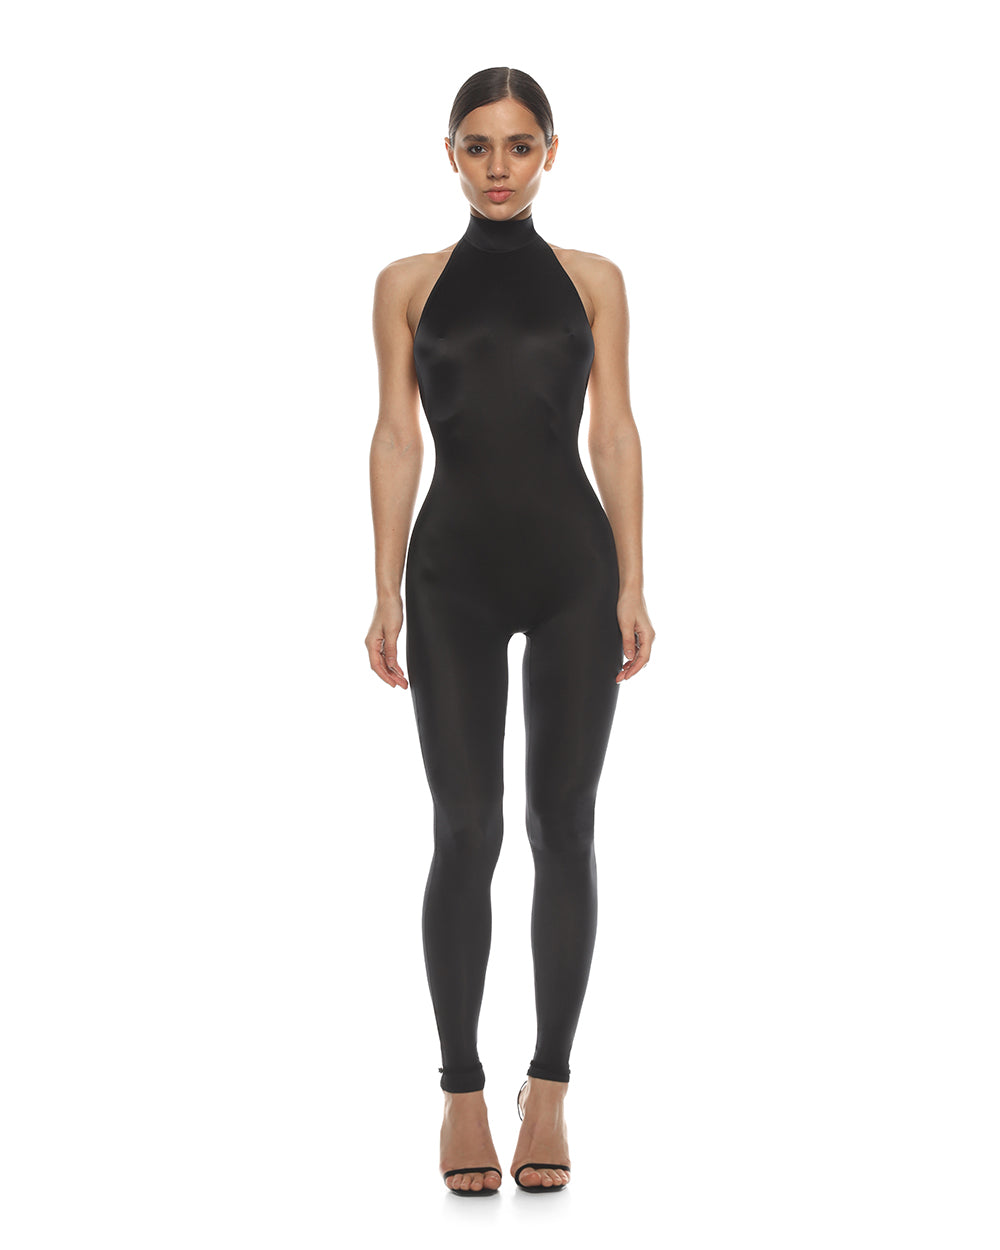 Bodysuit Ultra-stretch Durable Black Fabric – ANOESES